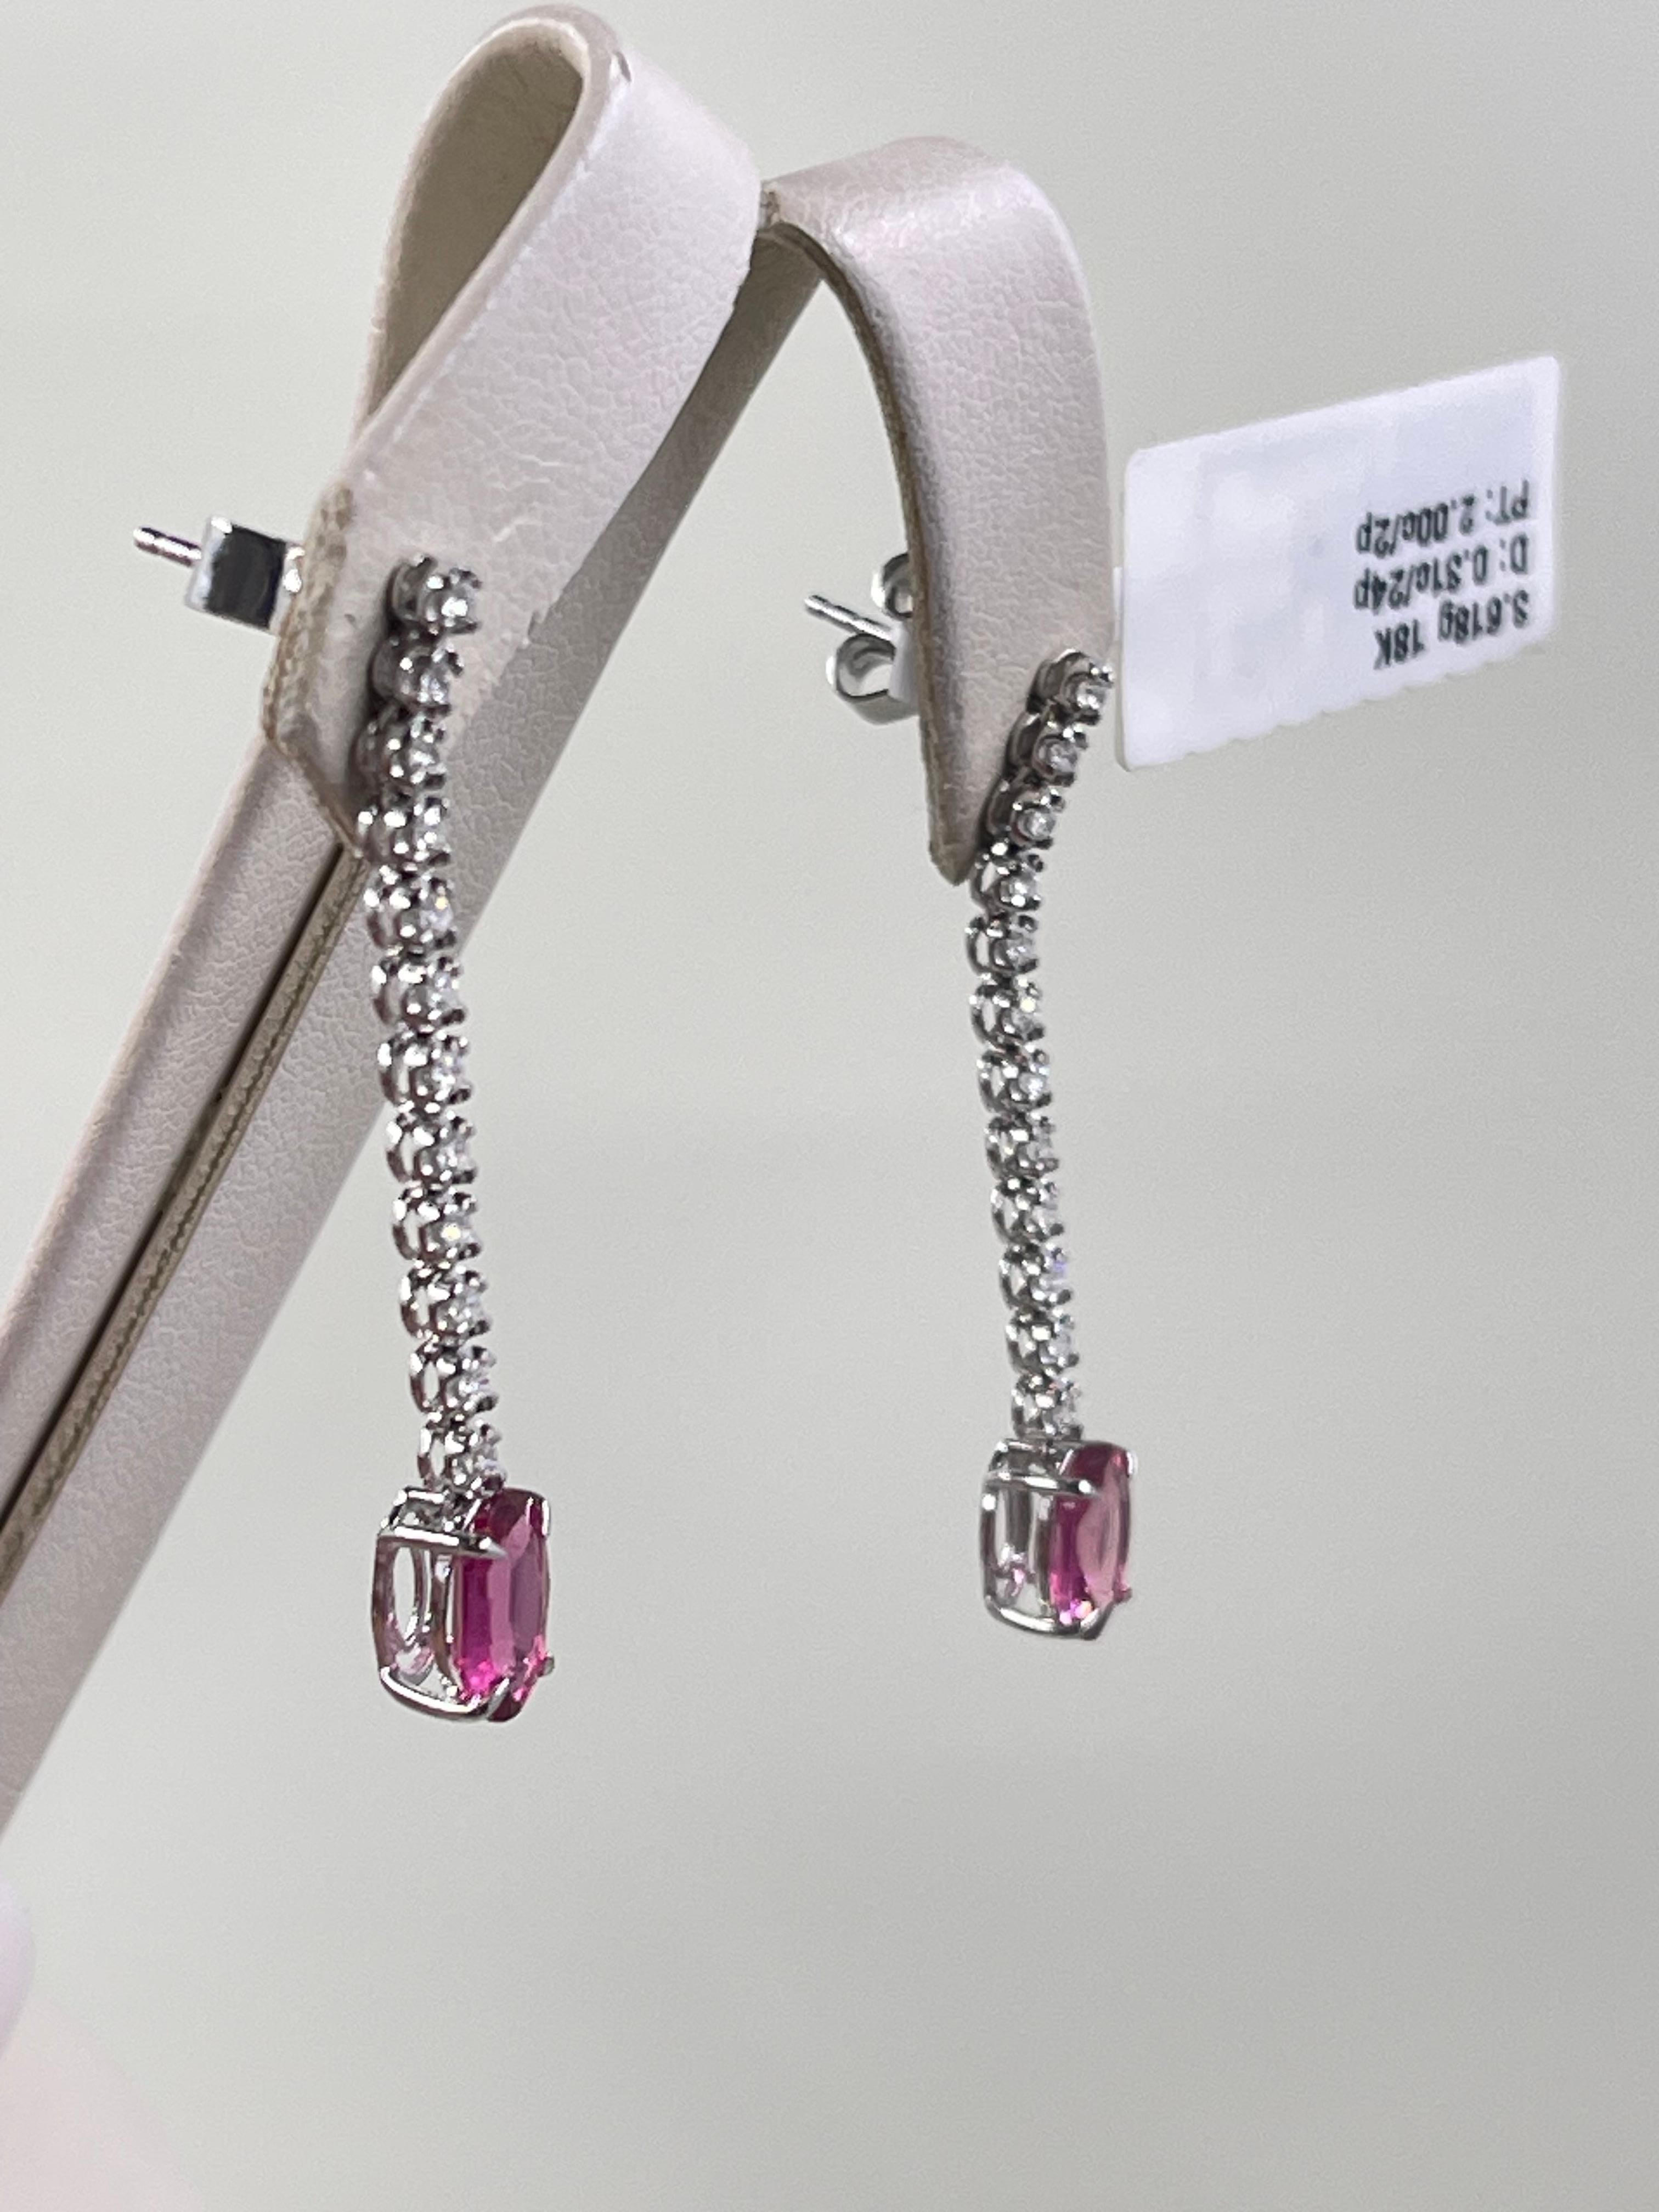 Stunning Diamond & Tourmaline Drop Earrings In 18k White Gold. 
- 0.31 total carats weight in diamonds,
- 2 total carats weight in pink tourmaline,
Hanging length is 1.5”
Elegant addition to your jewelry collection! 


